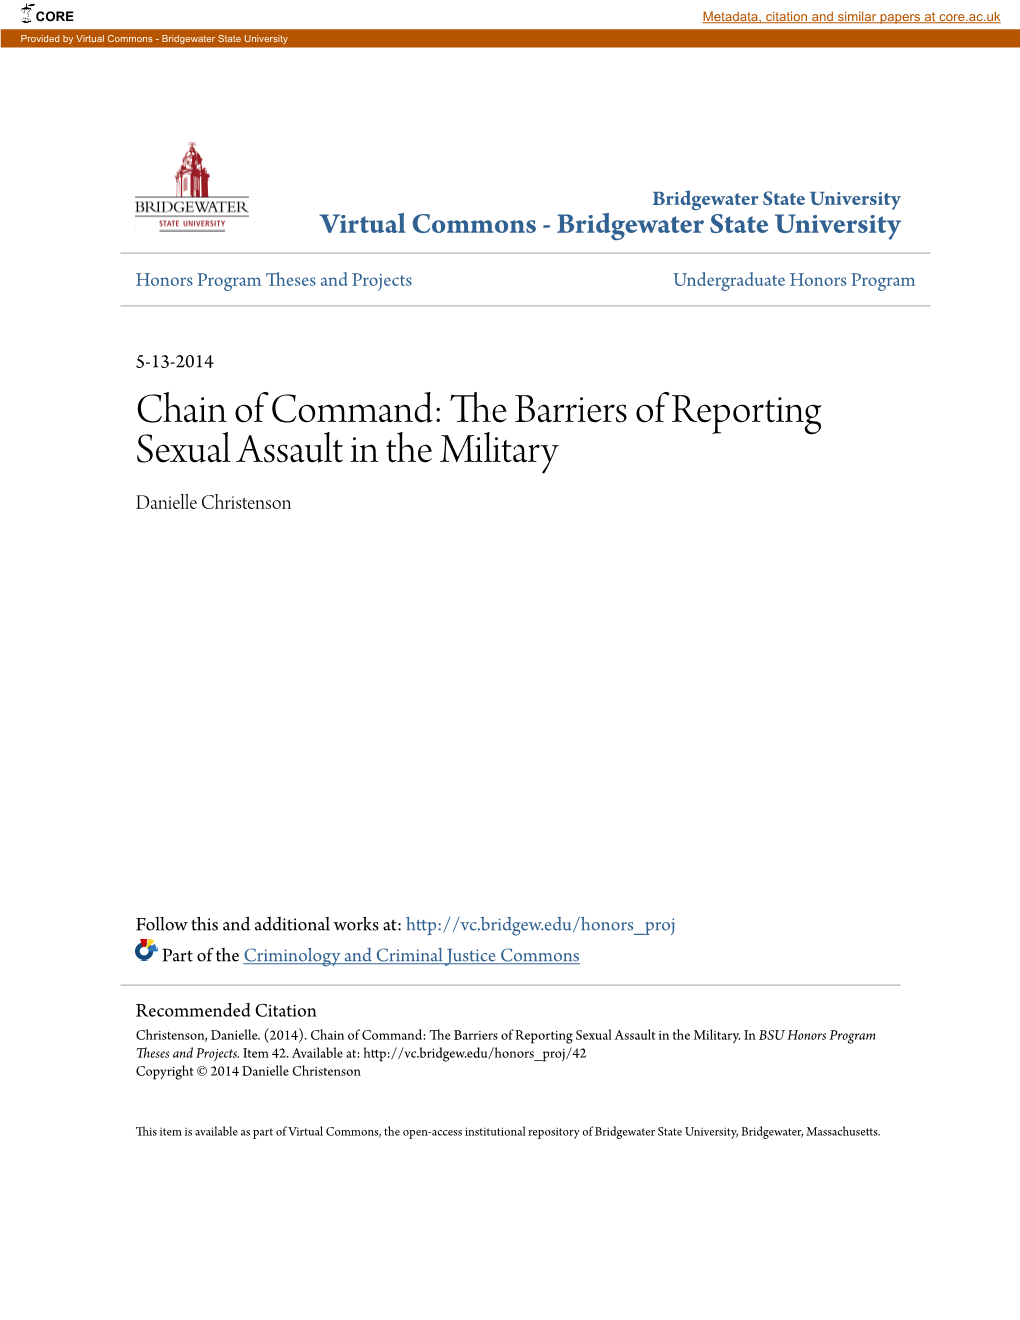 The Barriers of Reporting Sexual Assault in the Military